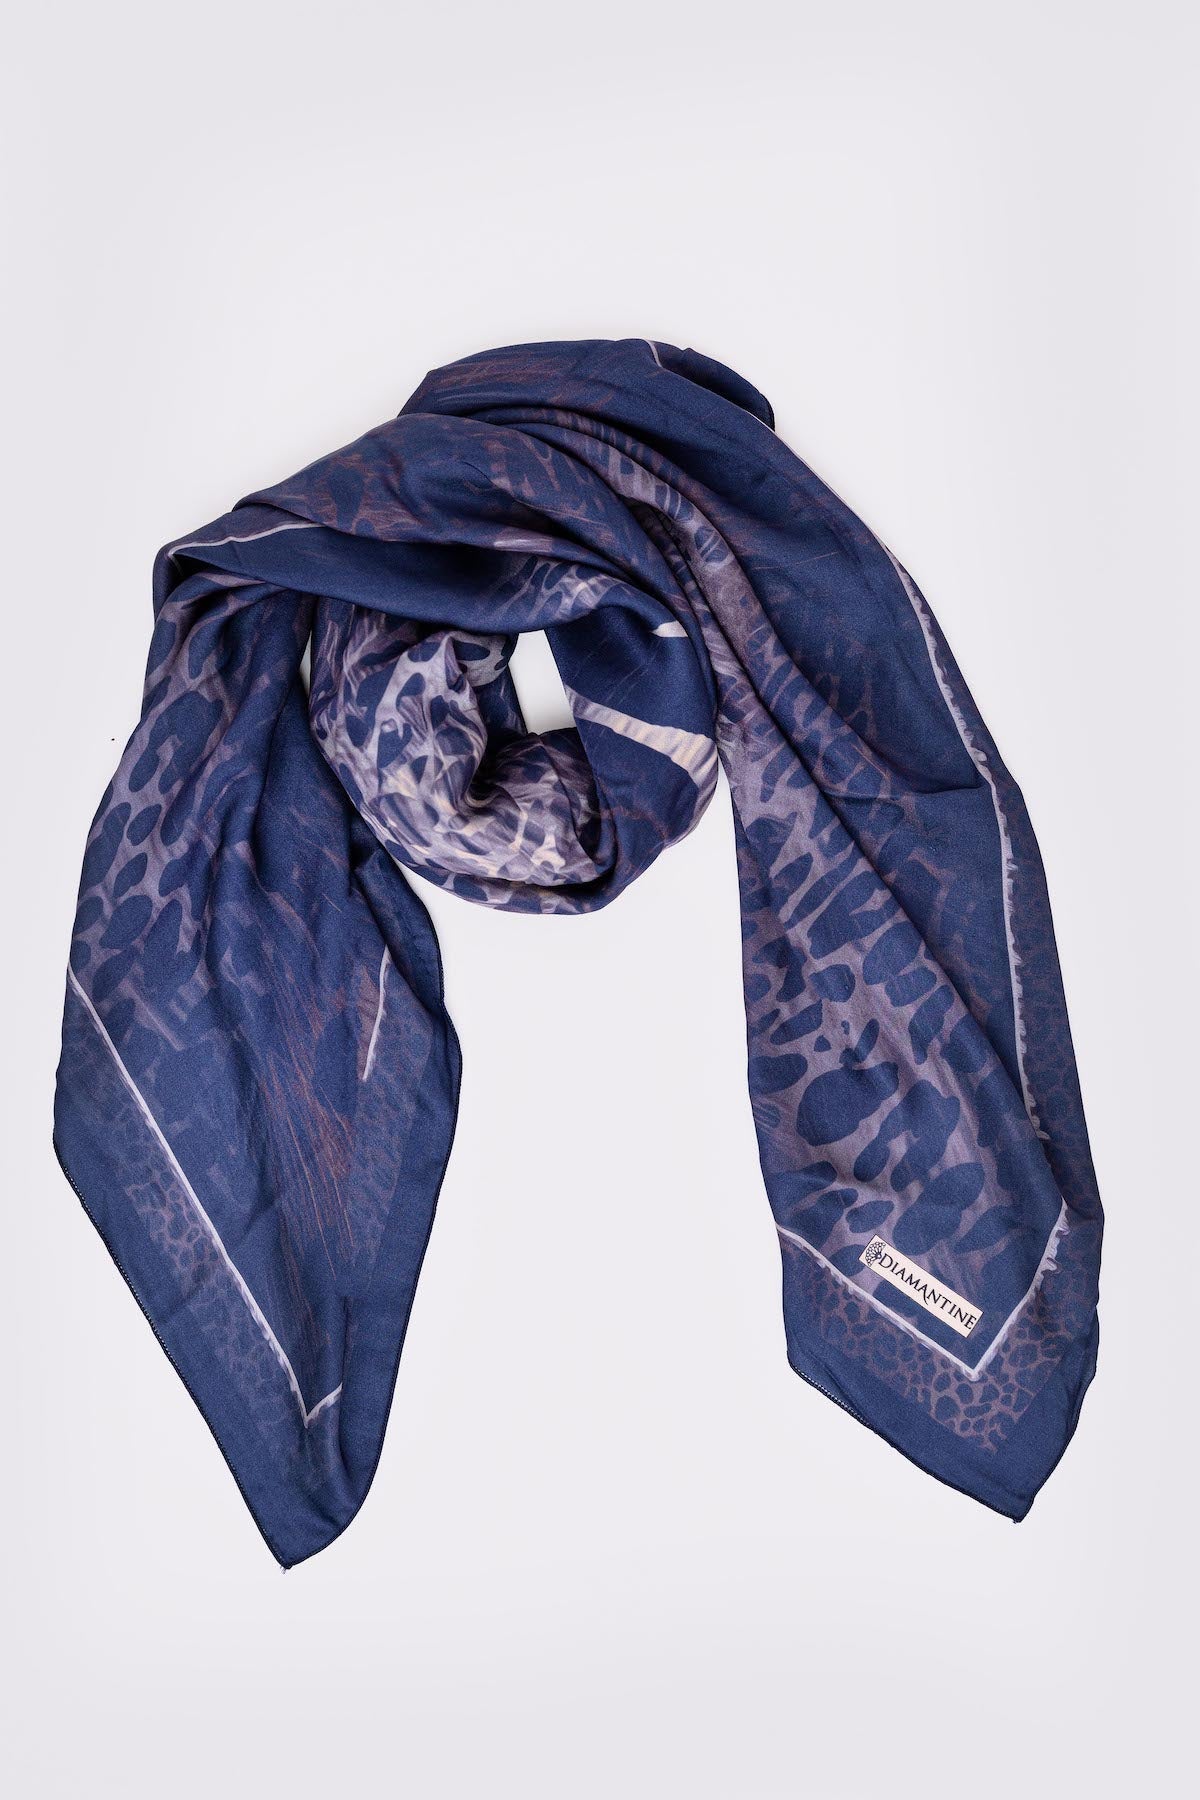 GUESS, Burgundy Women's Scarves And Foulards